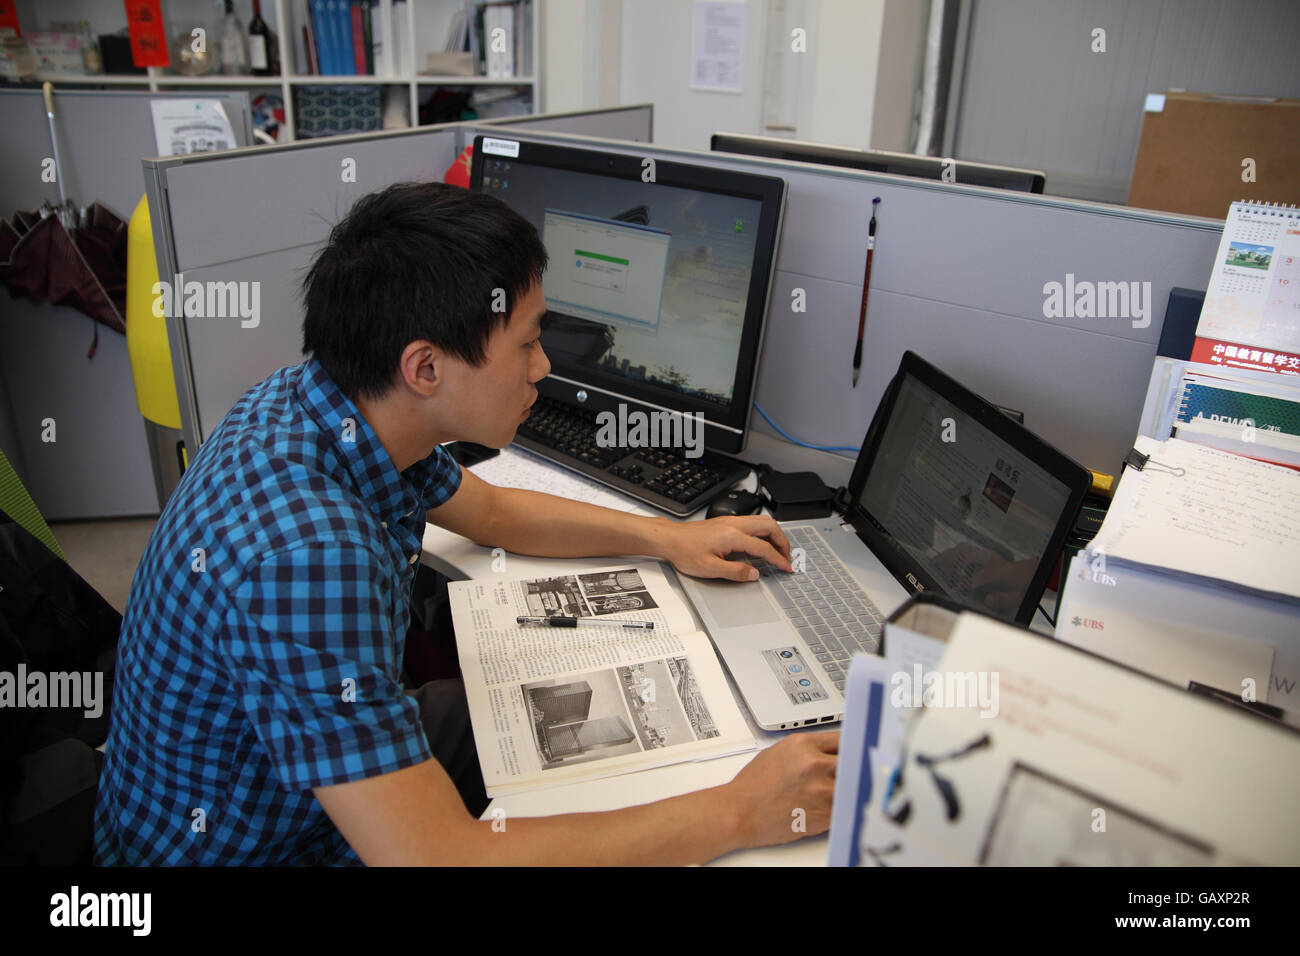 A young man student is using his laptop to design something in the Public Design Lab at the Hong Kong Polytechnic University. Hung Hom, Hong Kong. Stock Photo